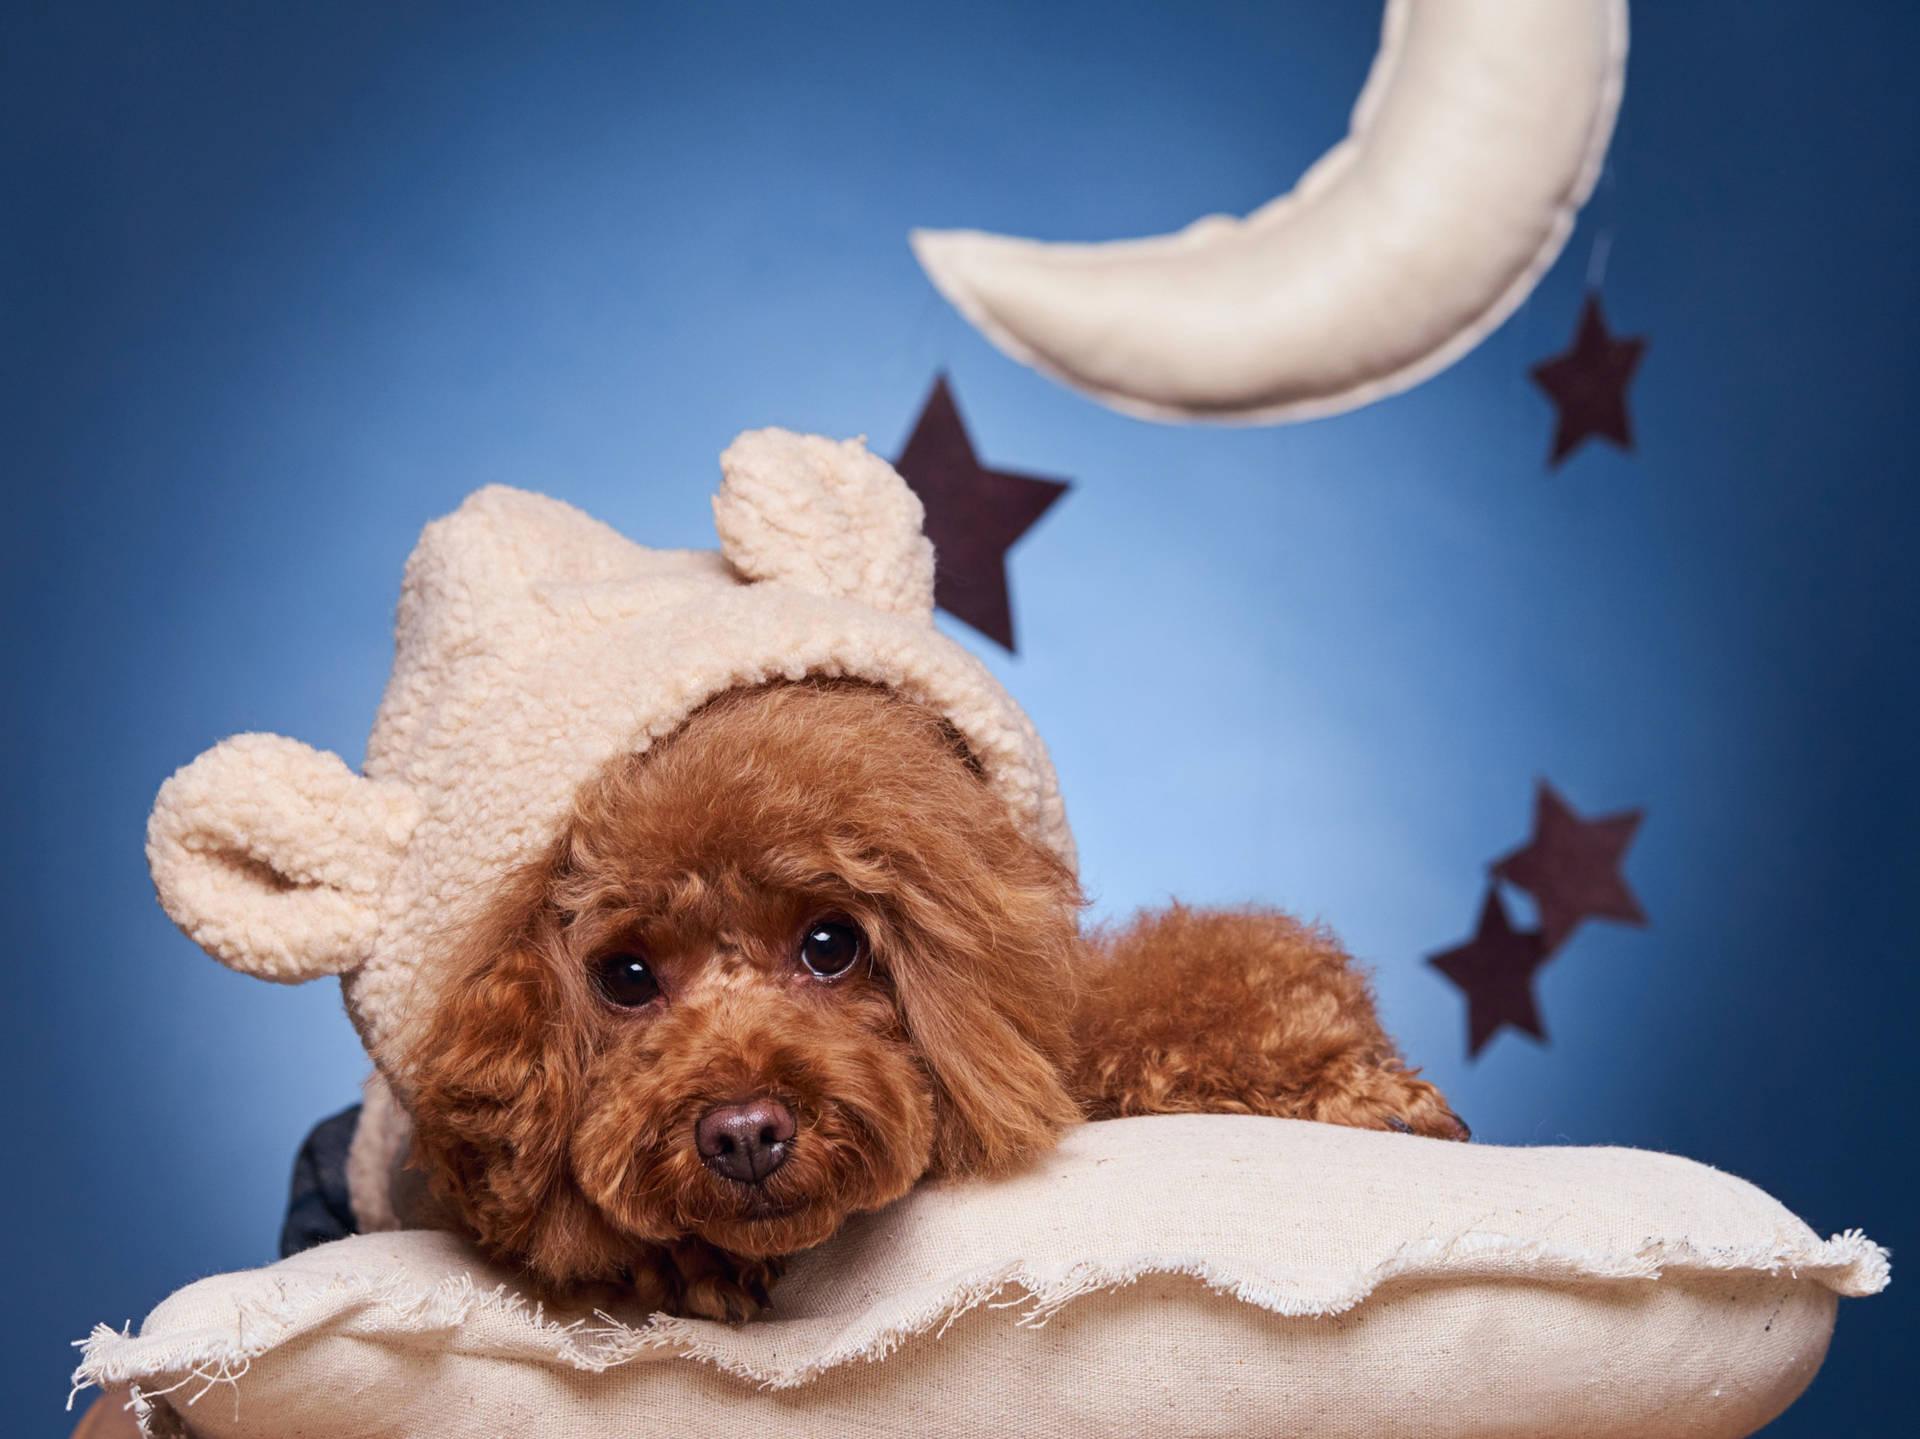 Sweet Dreams Fluffy Toy Poodle Wallpaper